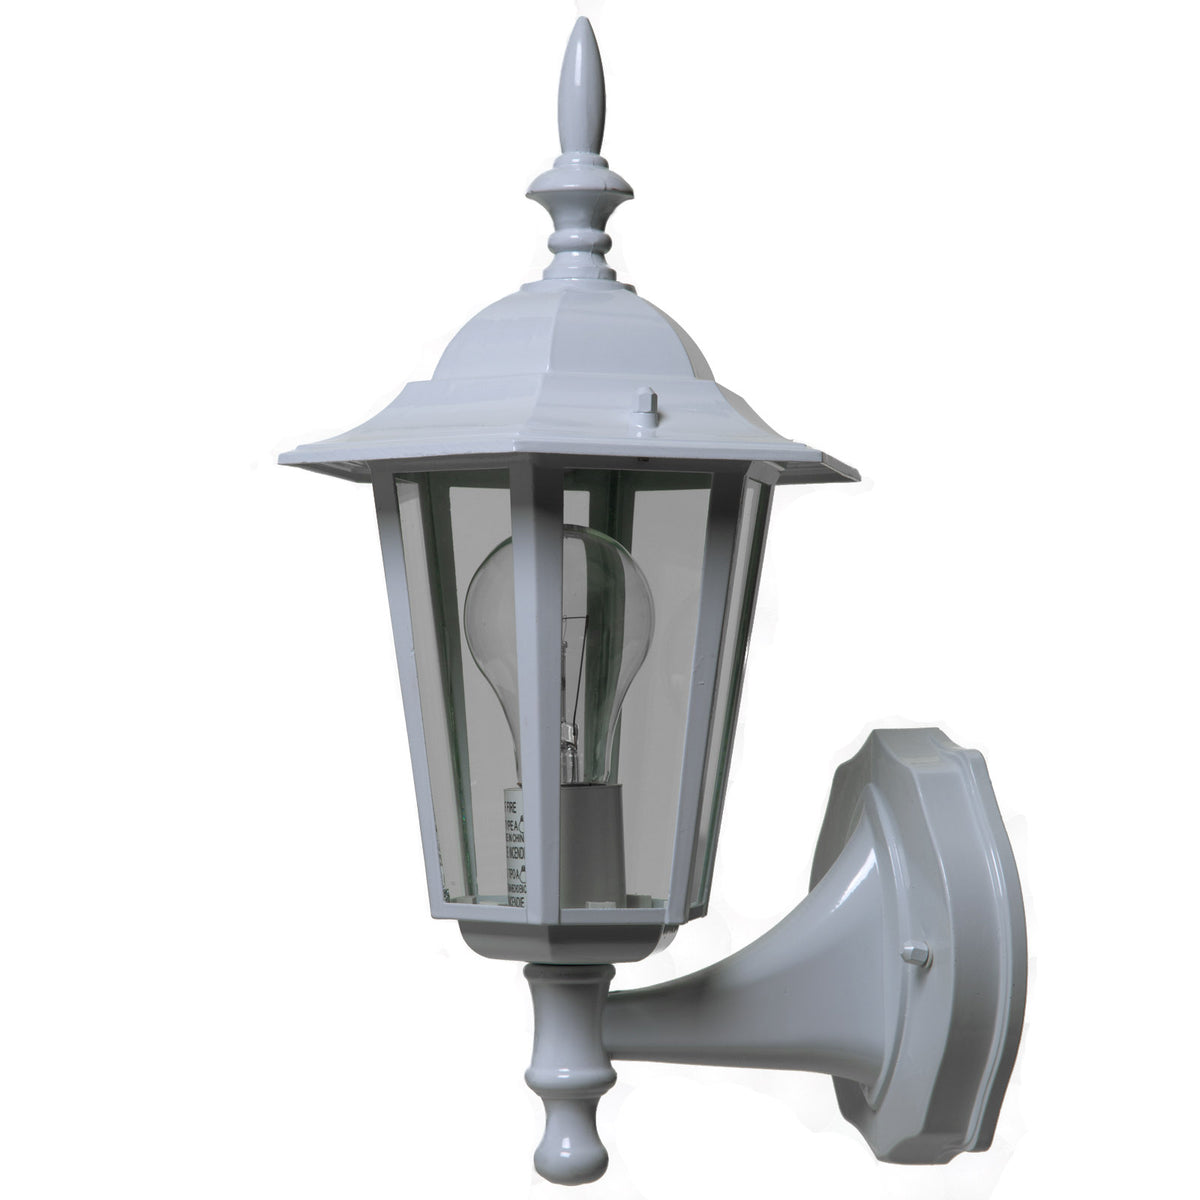 buy wall mount light fixtures at cheap rate in bulk. wholesale & retail lighting goods & supplies store. home décor ideas, maintenance, repair replacement parts